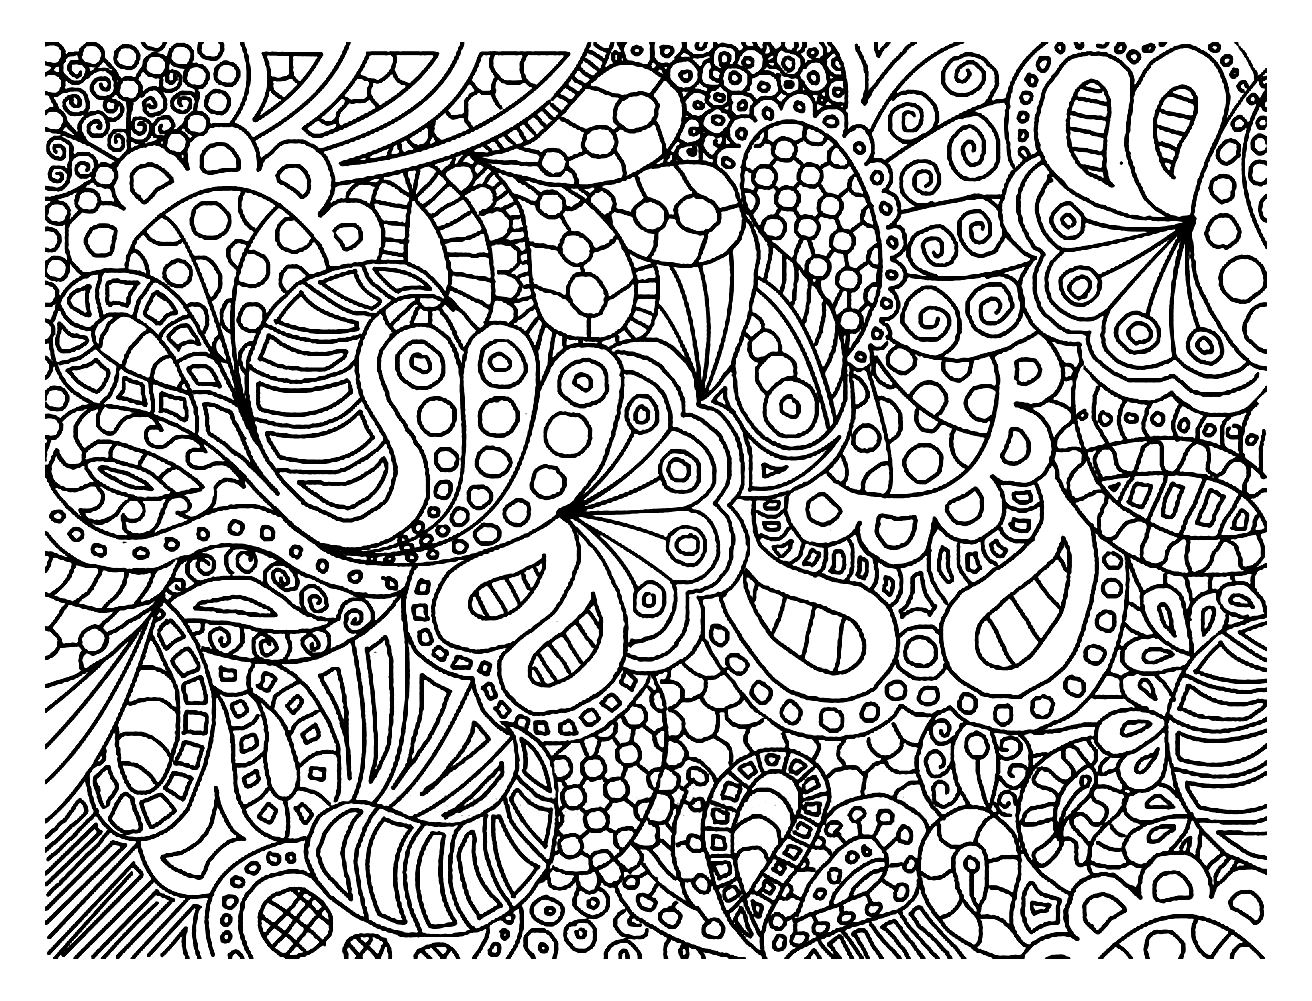 Doodling is cool !